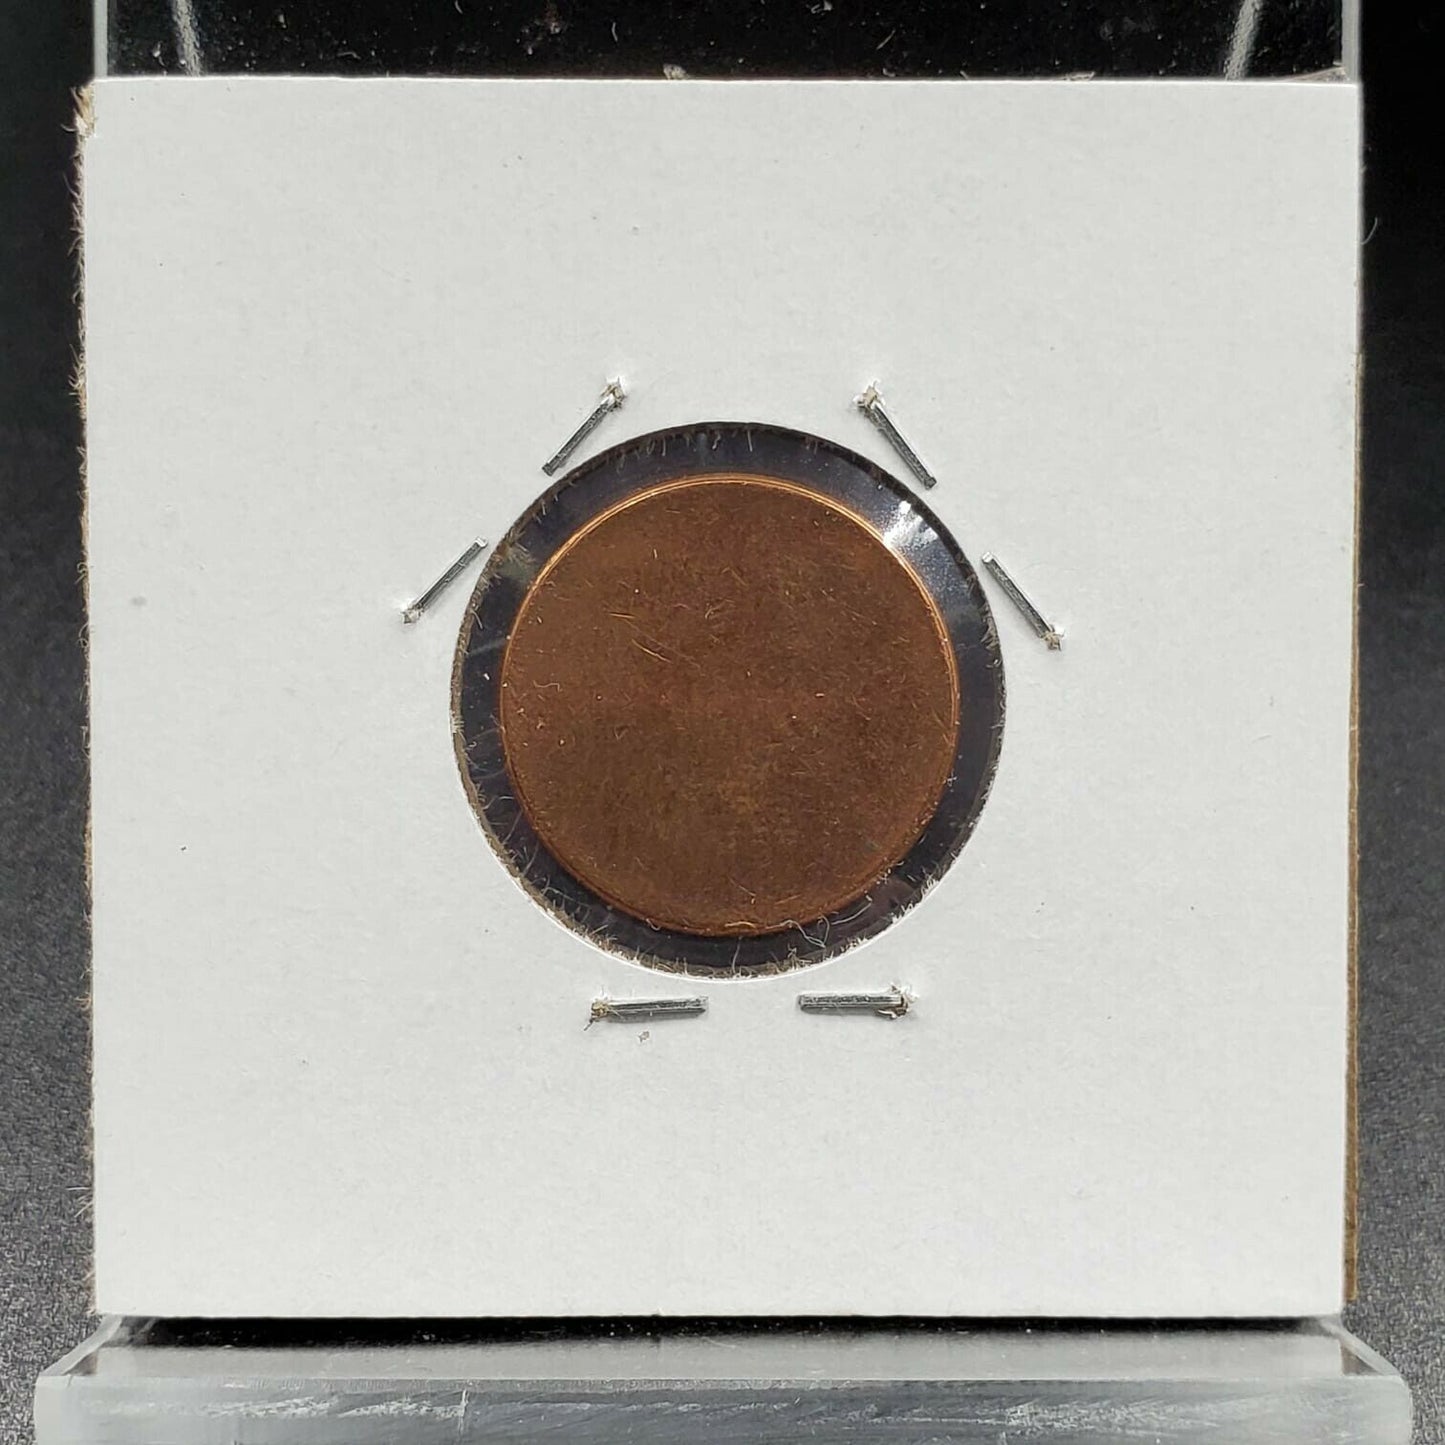 Type 2 Blank Lincoln Cent Penny 1947-1962 Error Variety Coin 2nd Bronze Alloy